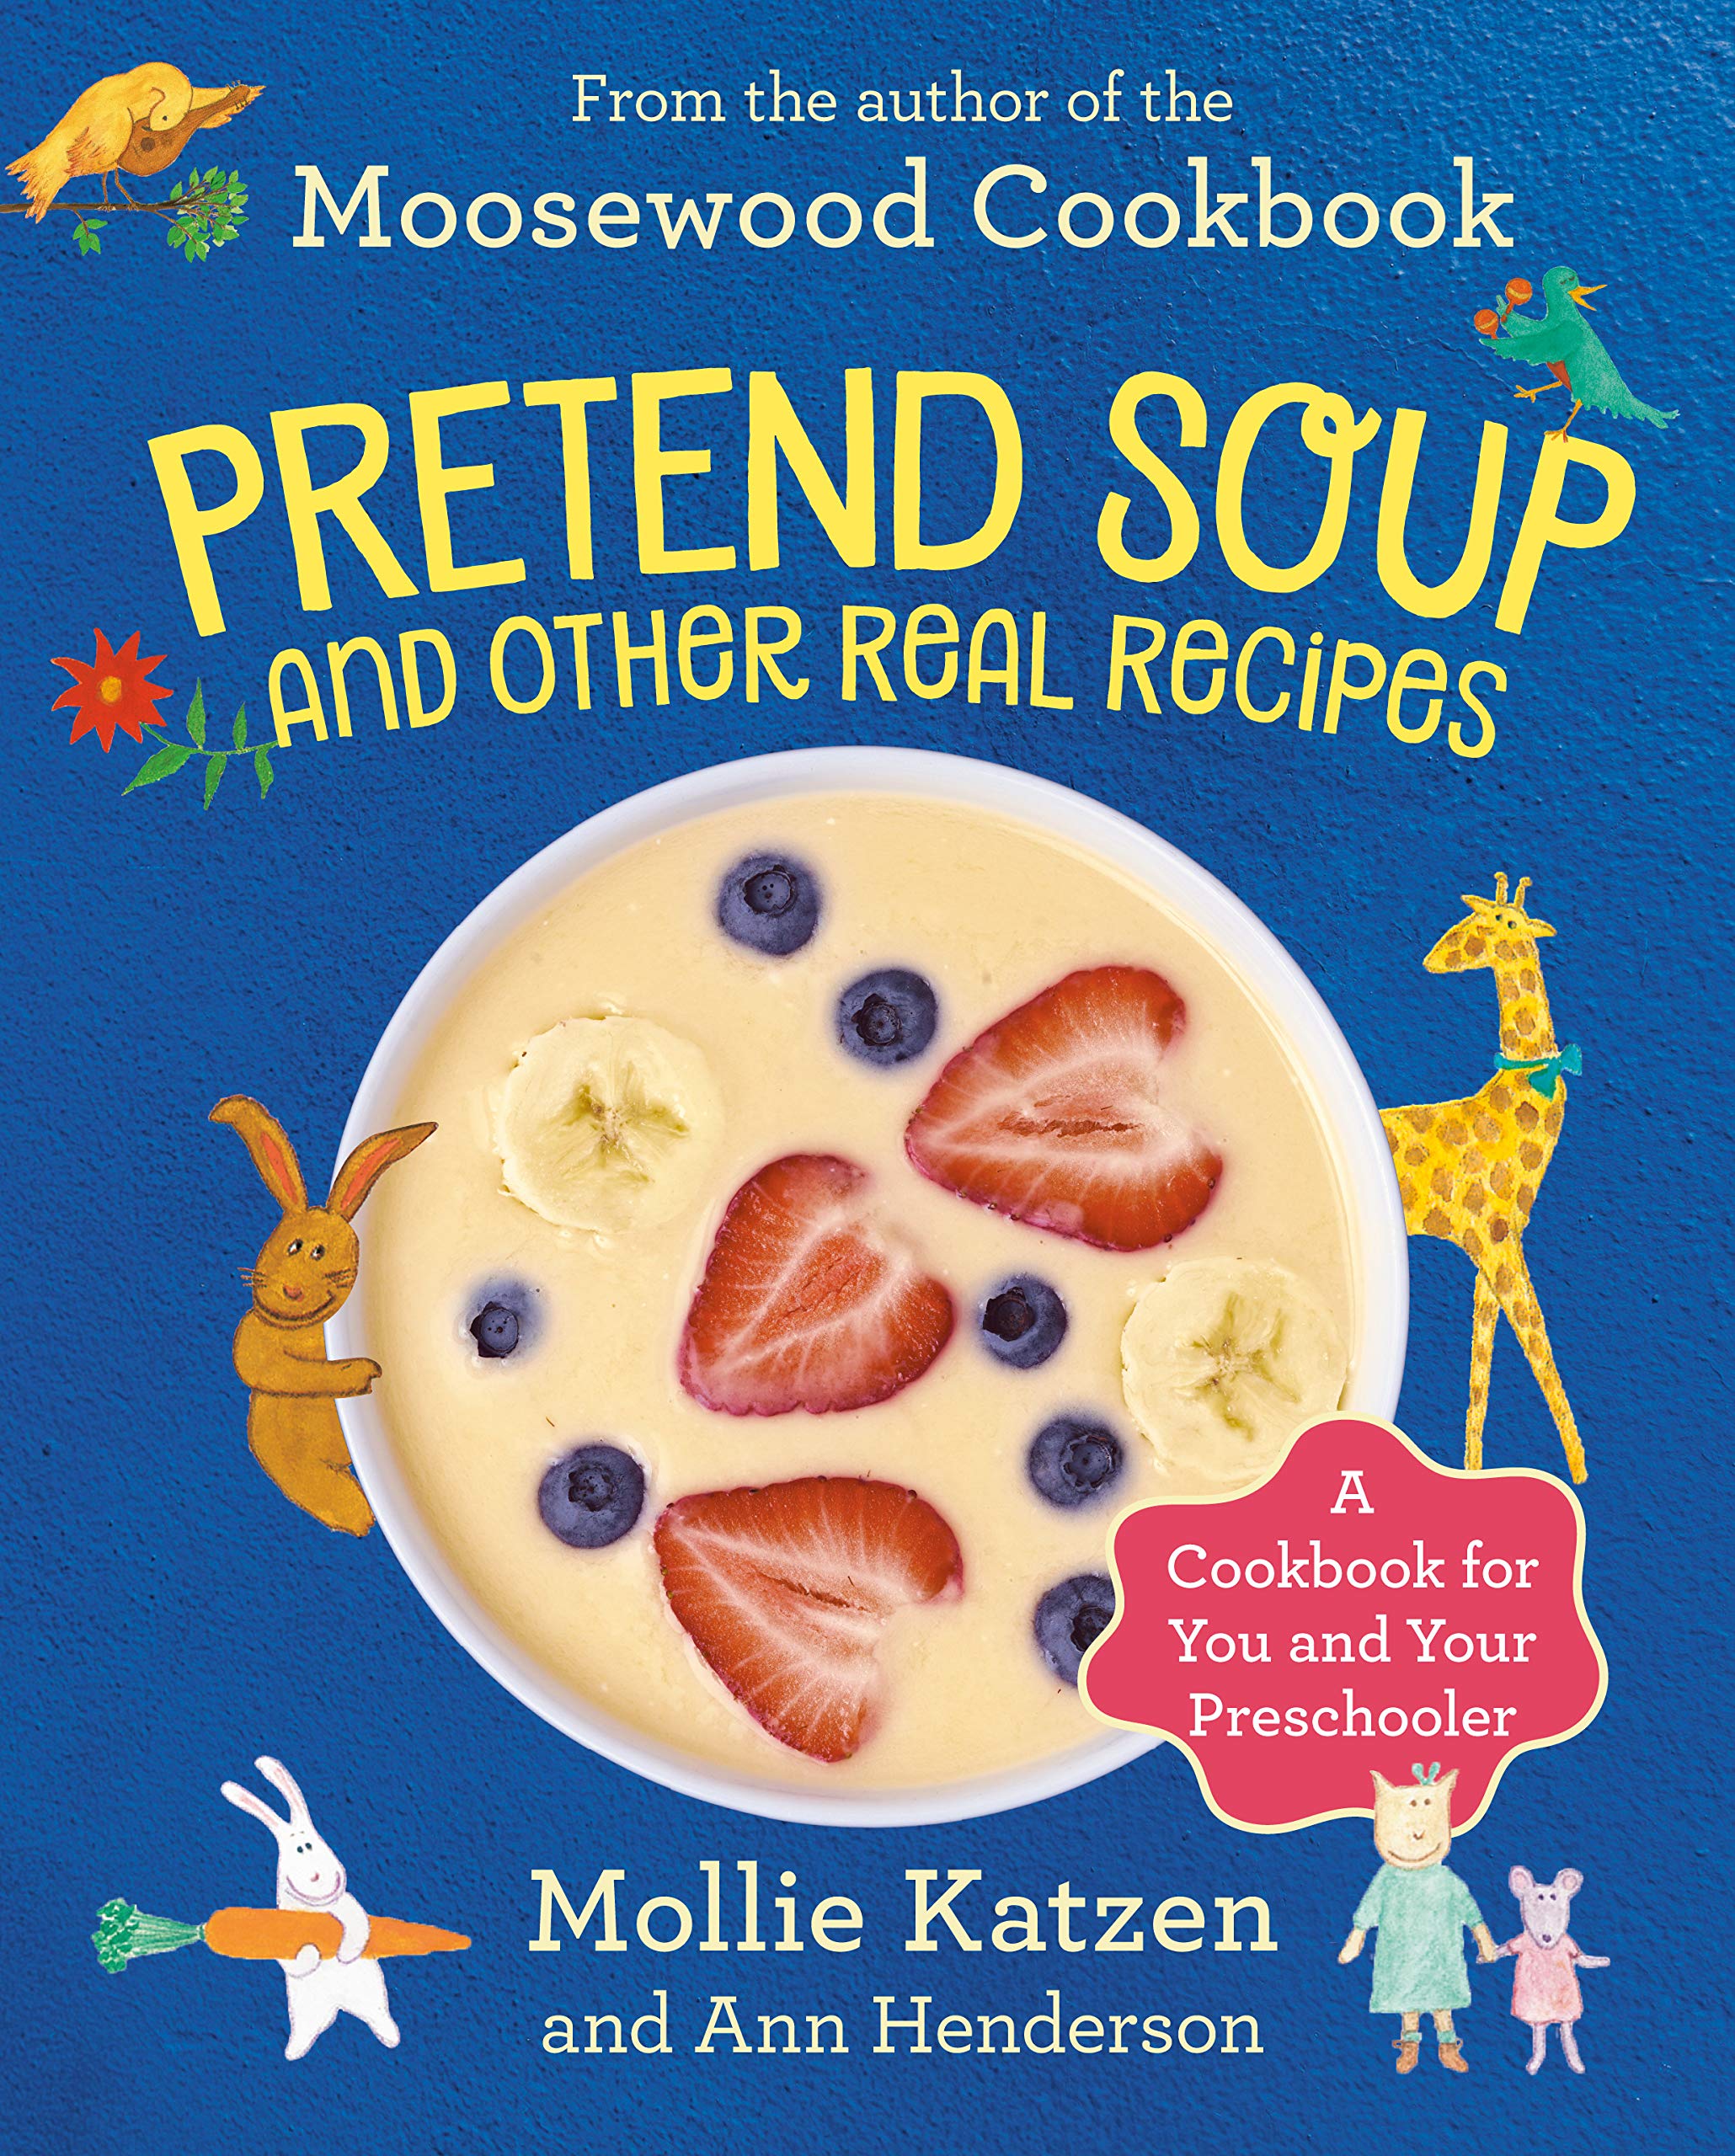 Pretend Soup and Other Real Recipes: A Cookbook for Preschoolers and Up (Mollie Katzen, Ann Henderson)